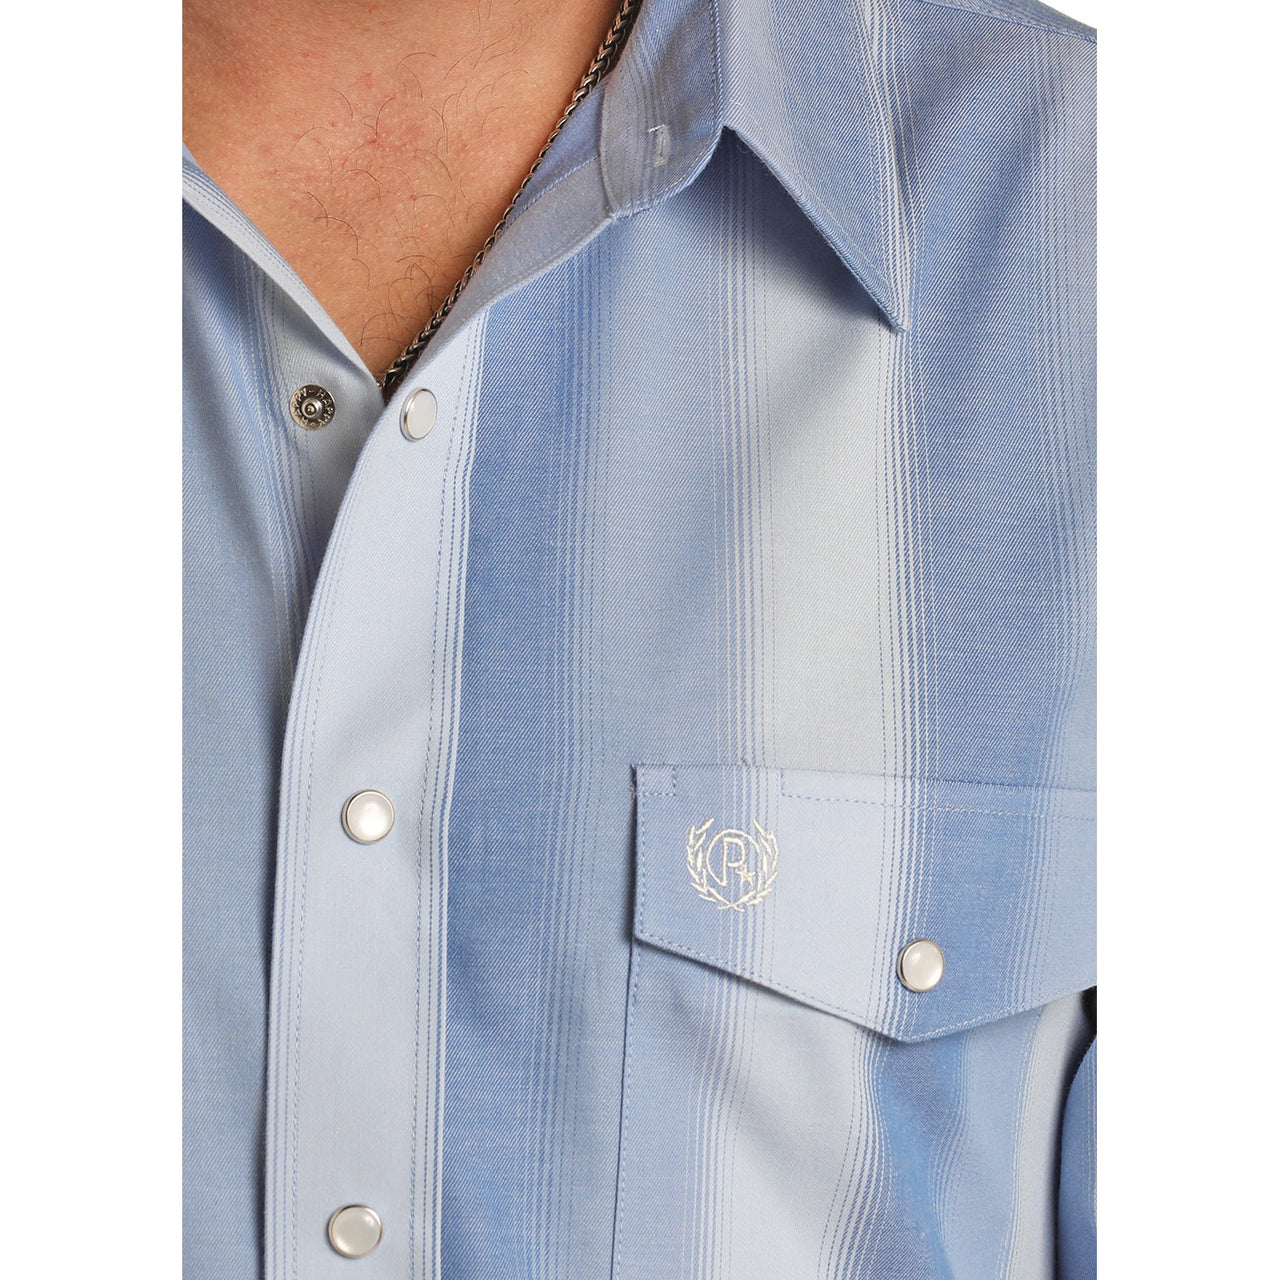 Panhandle Select Men's Long Sleeve 1 Pocket Striped Button Down Shirt - Baby Blue